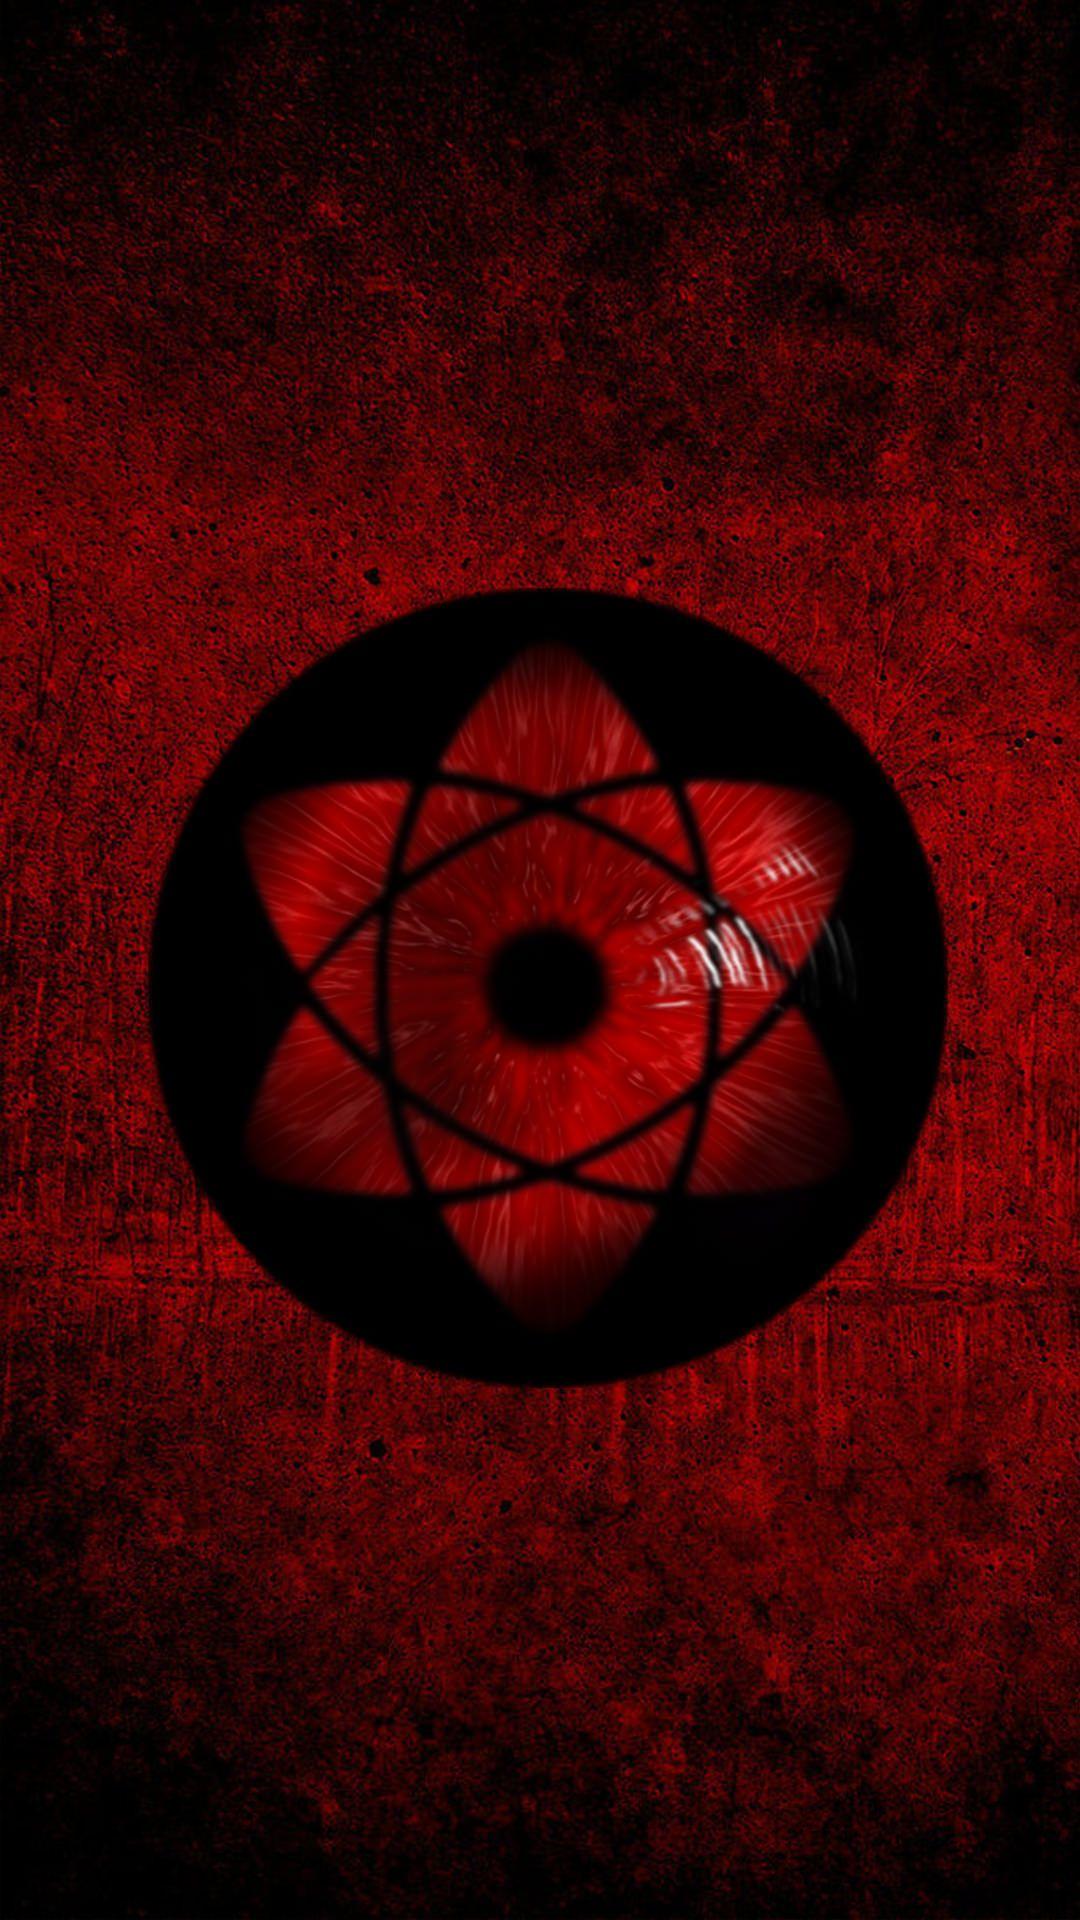 put together a sharingan phone wallpaper and thought you guys might